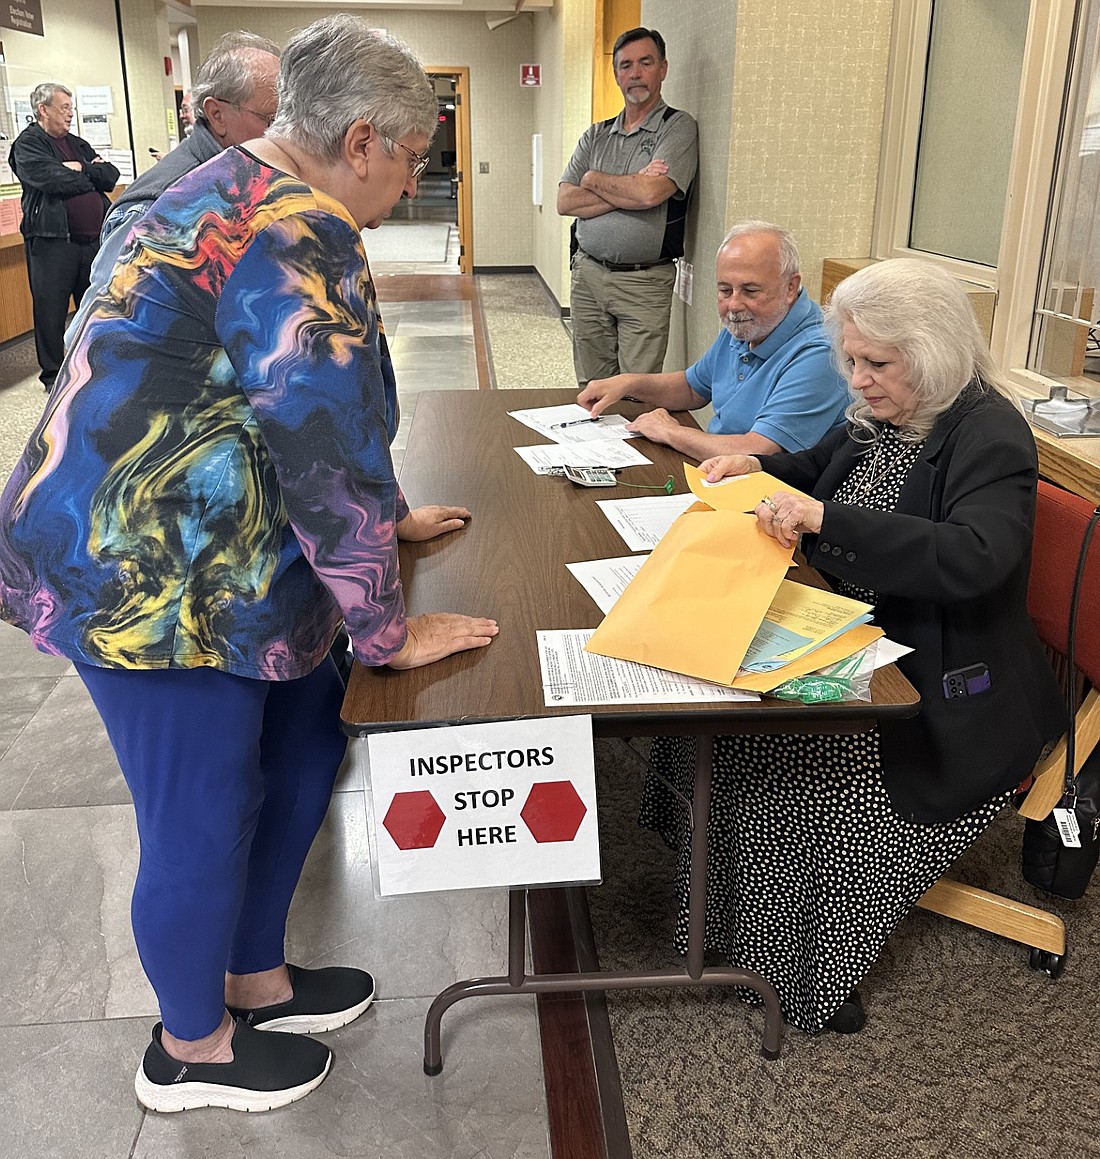 Election inspector Patty Yarian (L) speaks to poll workers Jack Brunetto (back) and DeAnna Ragan (R) after turning in some of the election results at the Kosciusko County Justice Building Tuesday night. Photo by David Slone, Times-Union